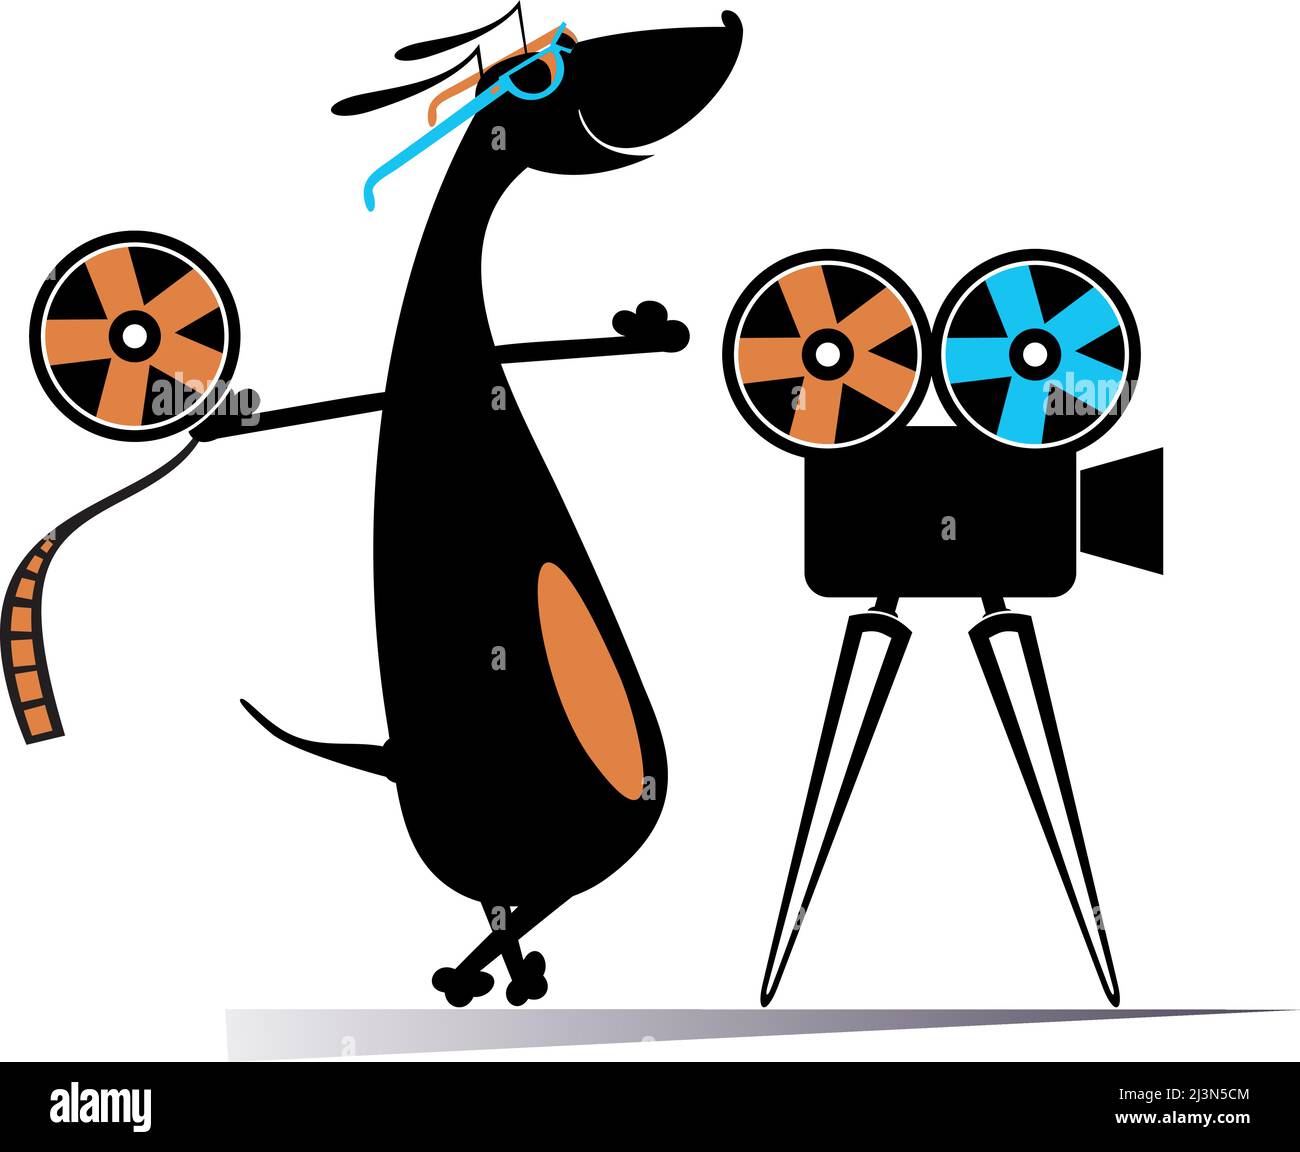 Cartoon dog, movie projector, tape illustration. Funny dog stands near the movie projector and holds a tape isolated on white background Stock Vector